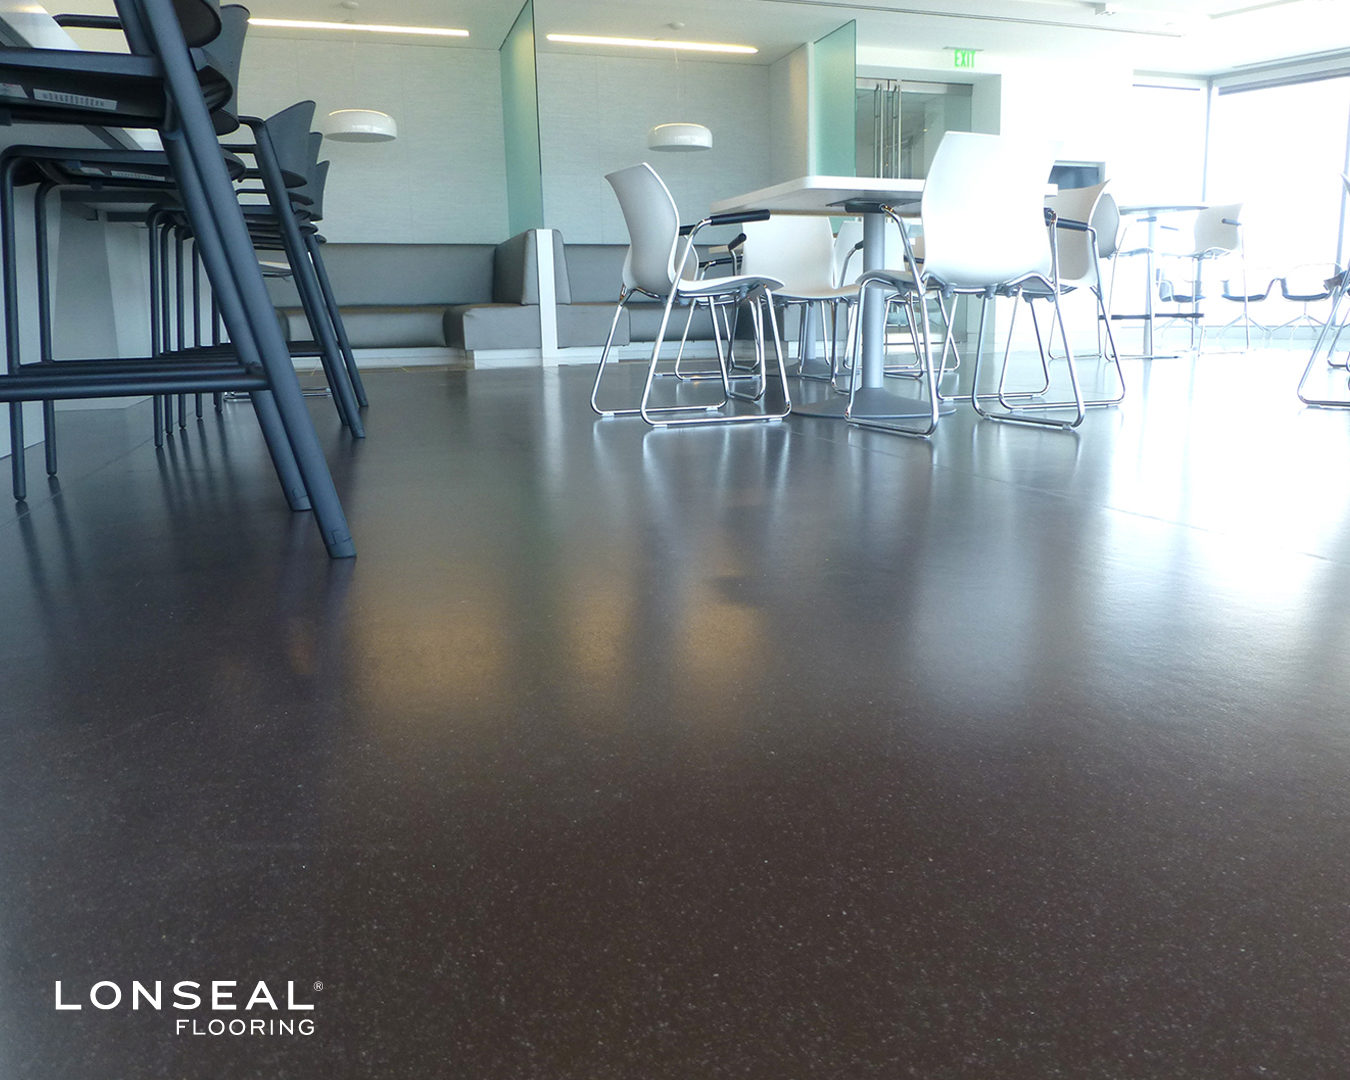 Lonseal, Sheet Vinyl Flooring, Lonfloor Galvanized with Topseal lends a striking industrial touch to any interior, from